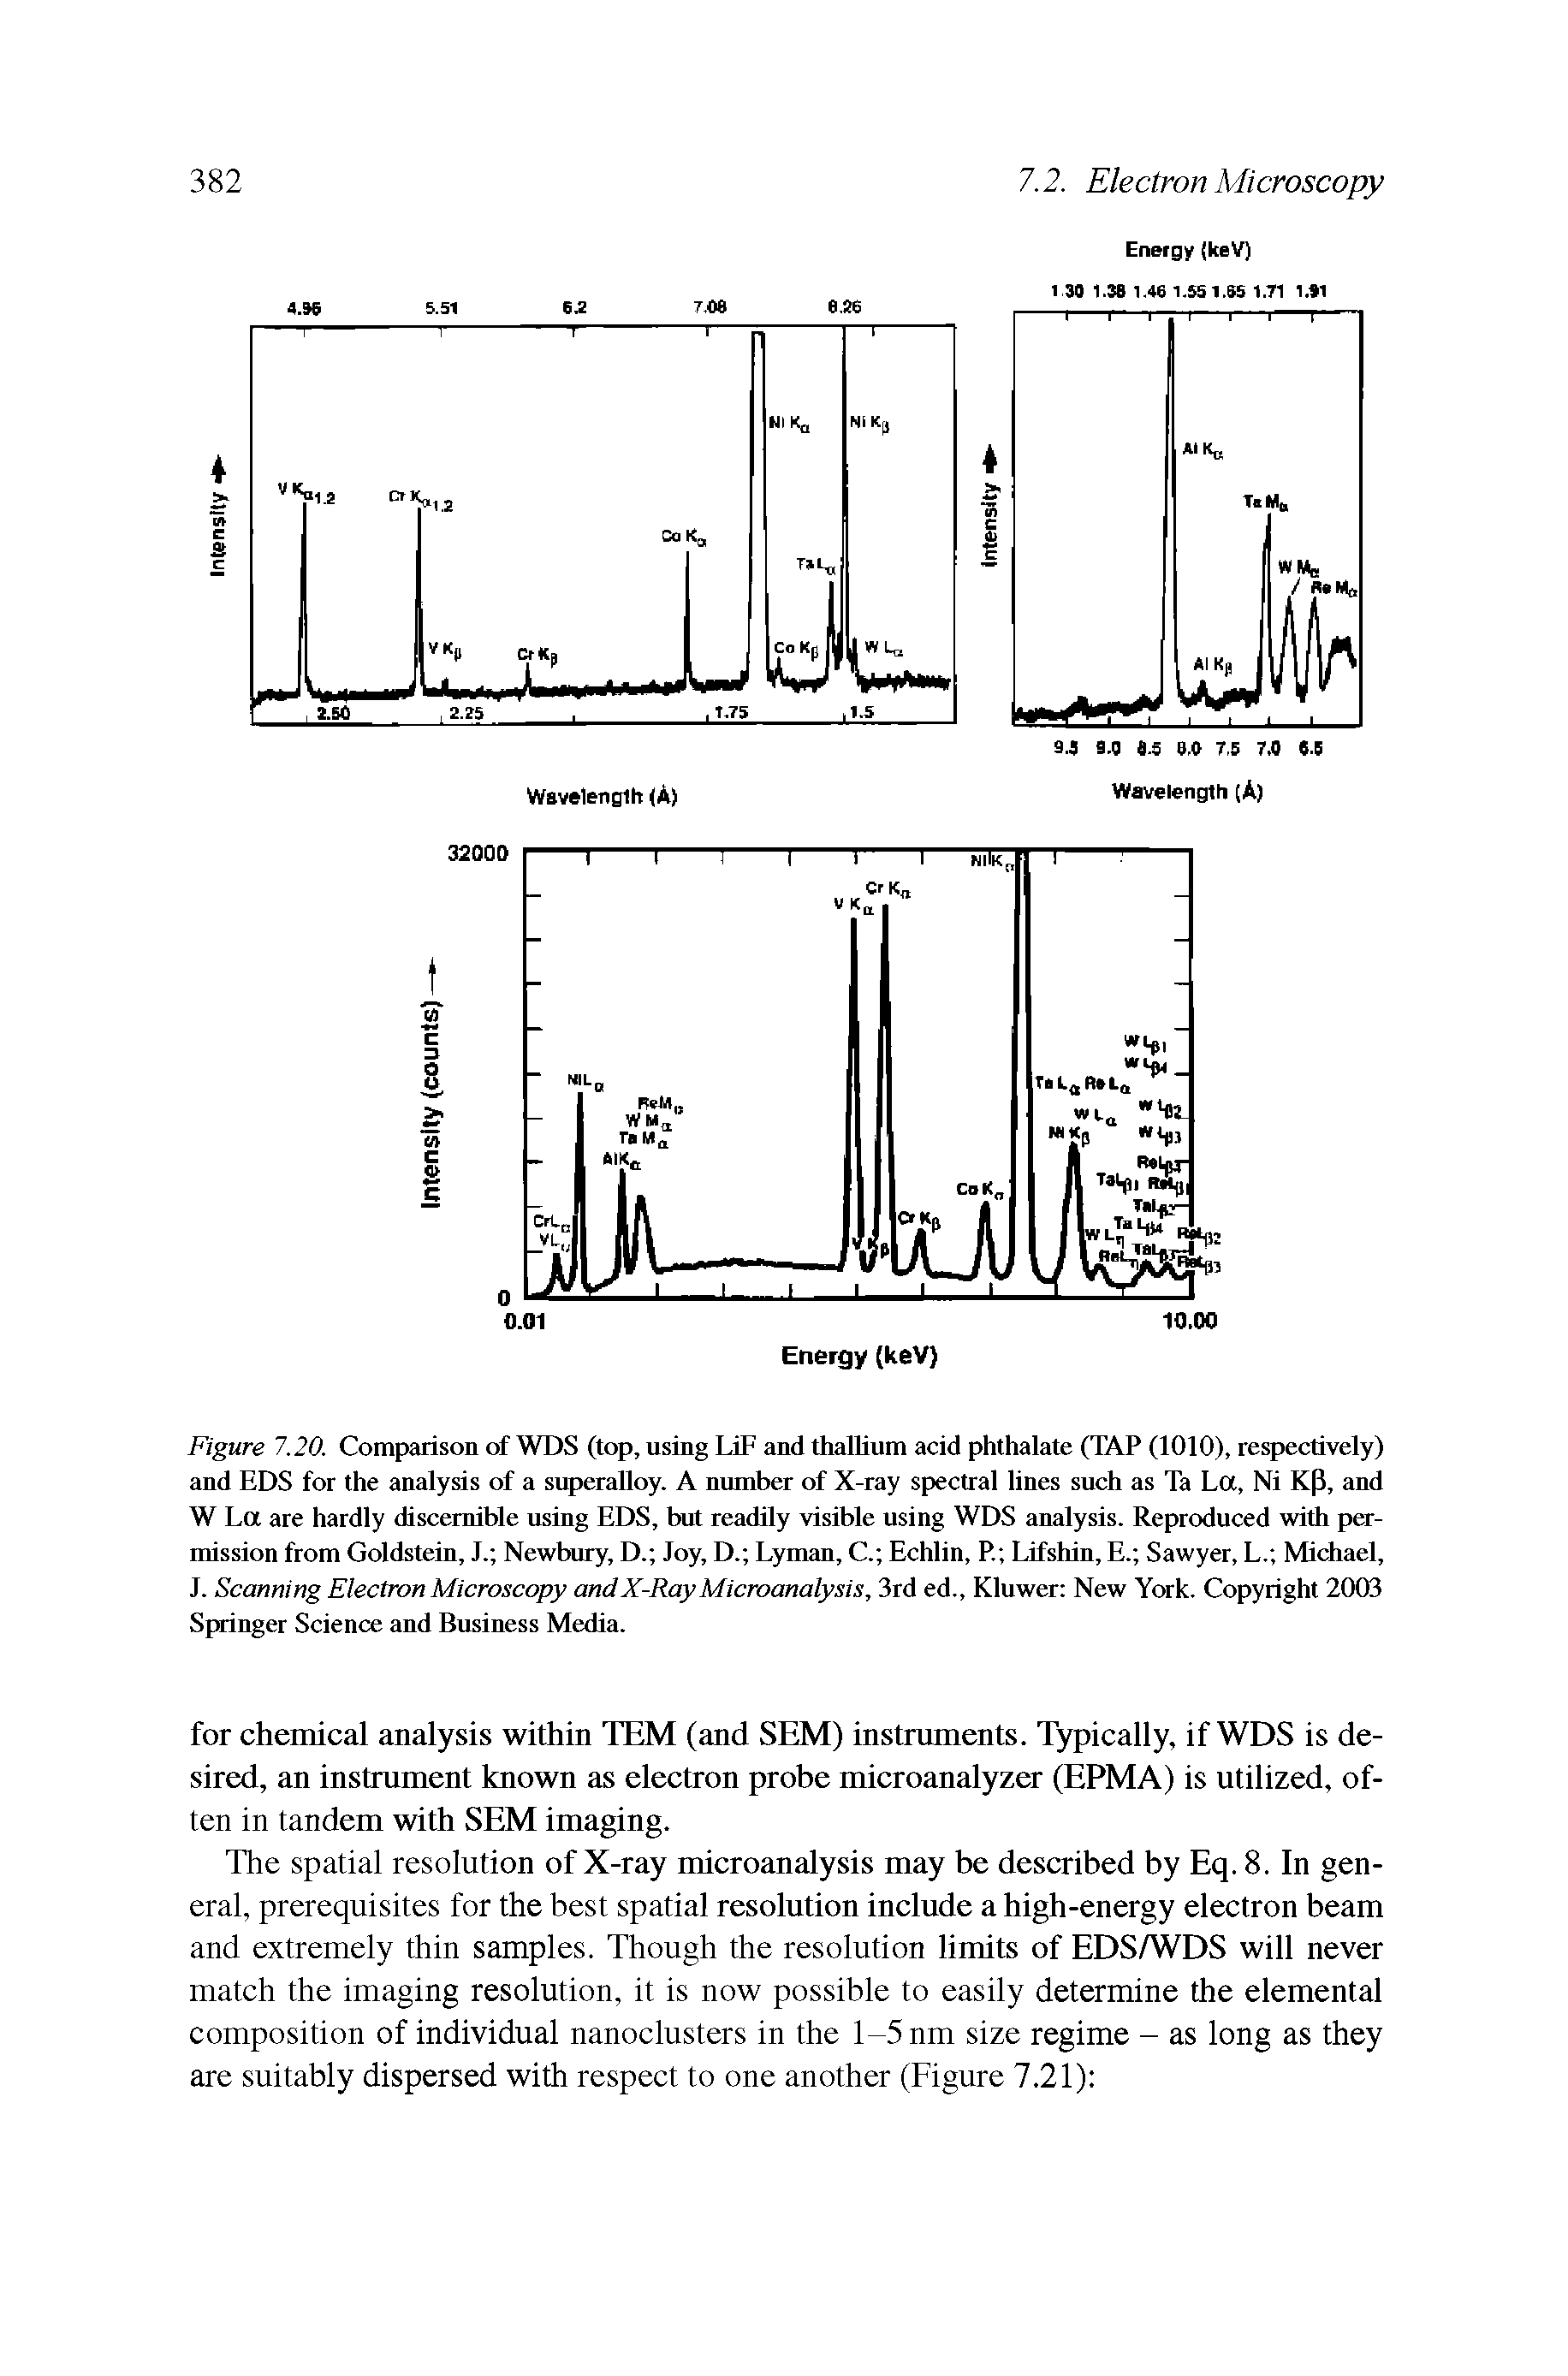 Figure 7.20. Comparison of WDS (top, using LiF and thallium acid phthalate (TAP (1010), respectively) and EDS for the analysis of a superalloy. A number of X-ray spectral lines such as Ta La, Ni Kp, and W La are hardly discernible using EDS, but readily visible using WDS analysis. Reproduced with permission from Goldstein, J. Newbury, D. Joy, D. Lyman, C. Echlin, R Lifshin, E. Sawyer, L. Michael, J. Scanning Electron Microscopy and X-Ray Microanalysis, 3rd ed., Kluwer New York. Copyright 2003 Springer Science and Business Media.